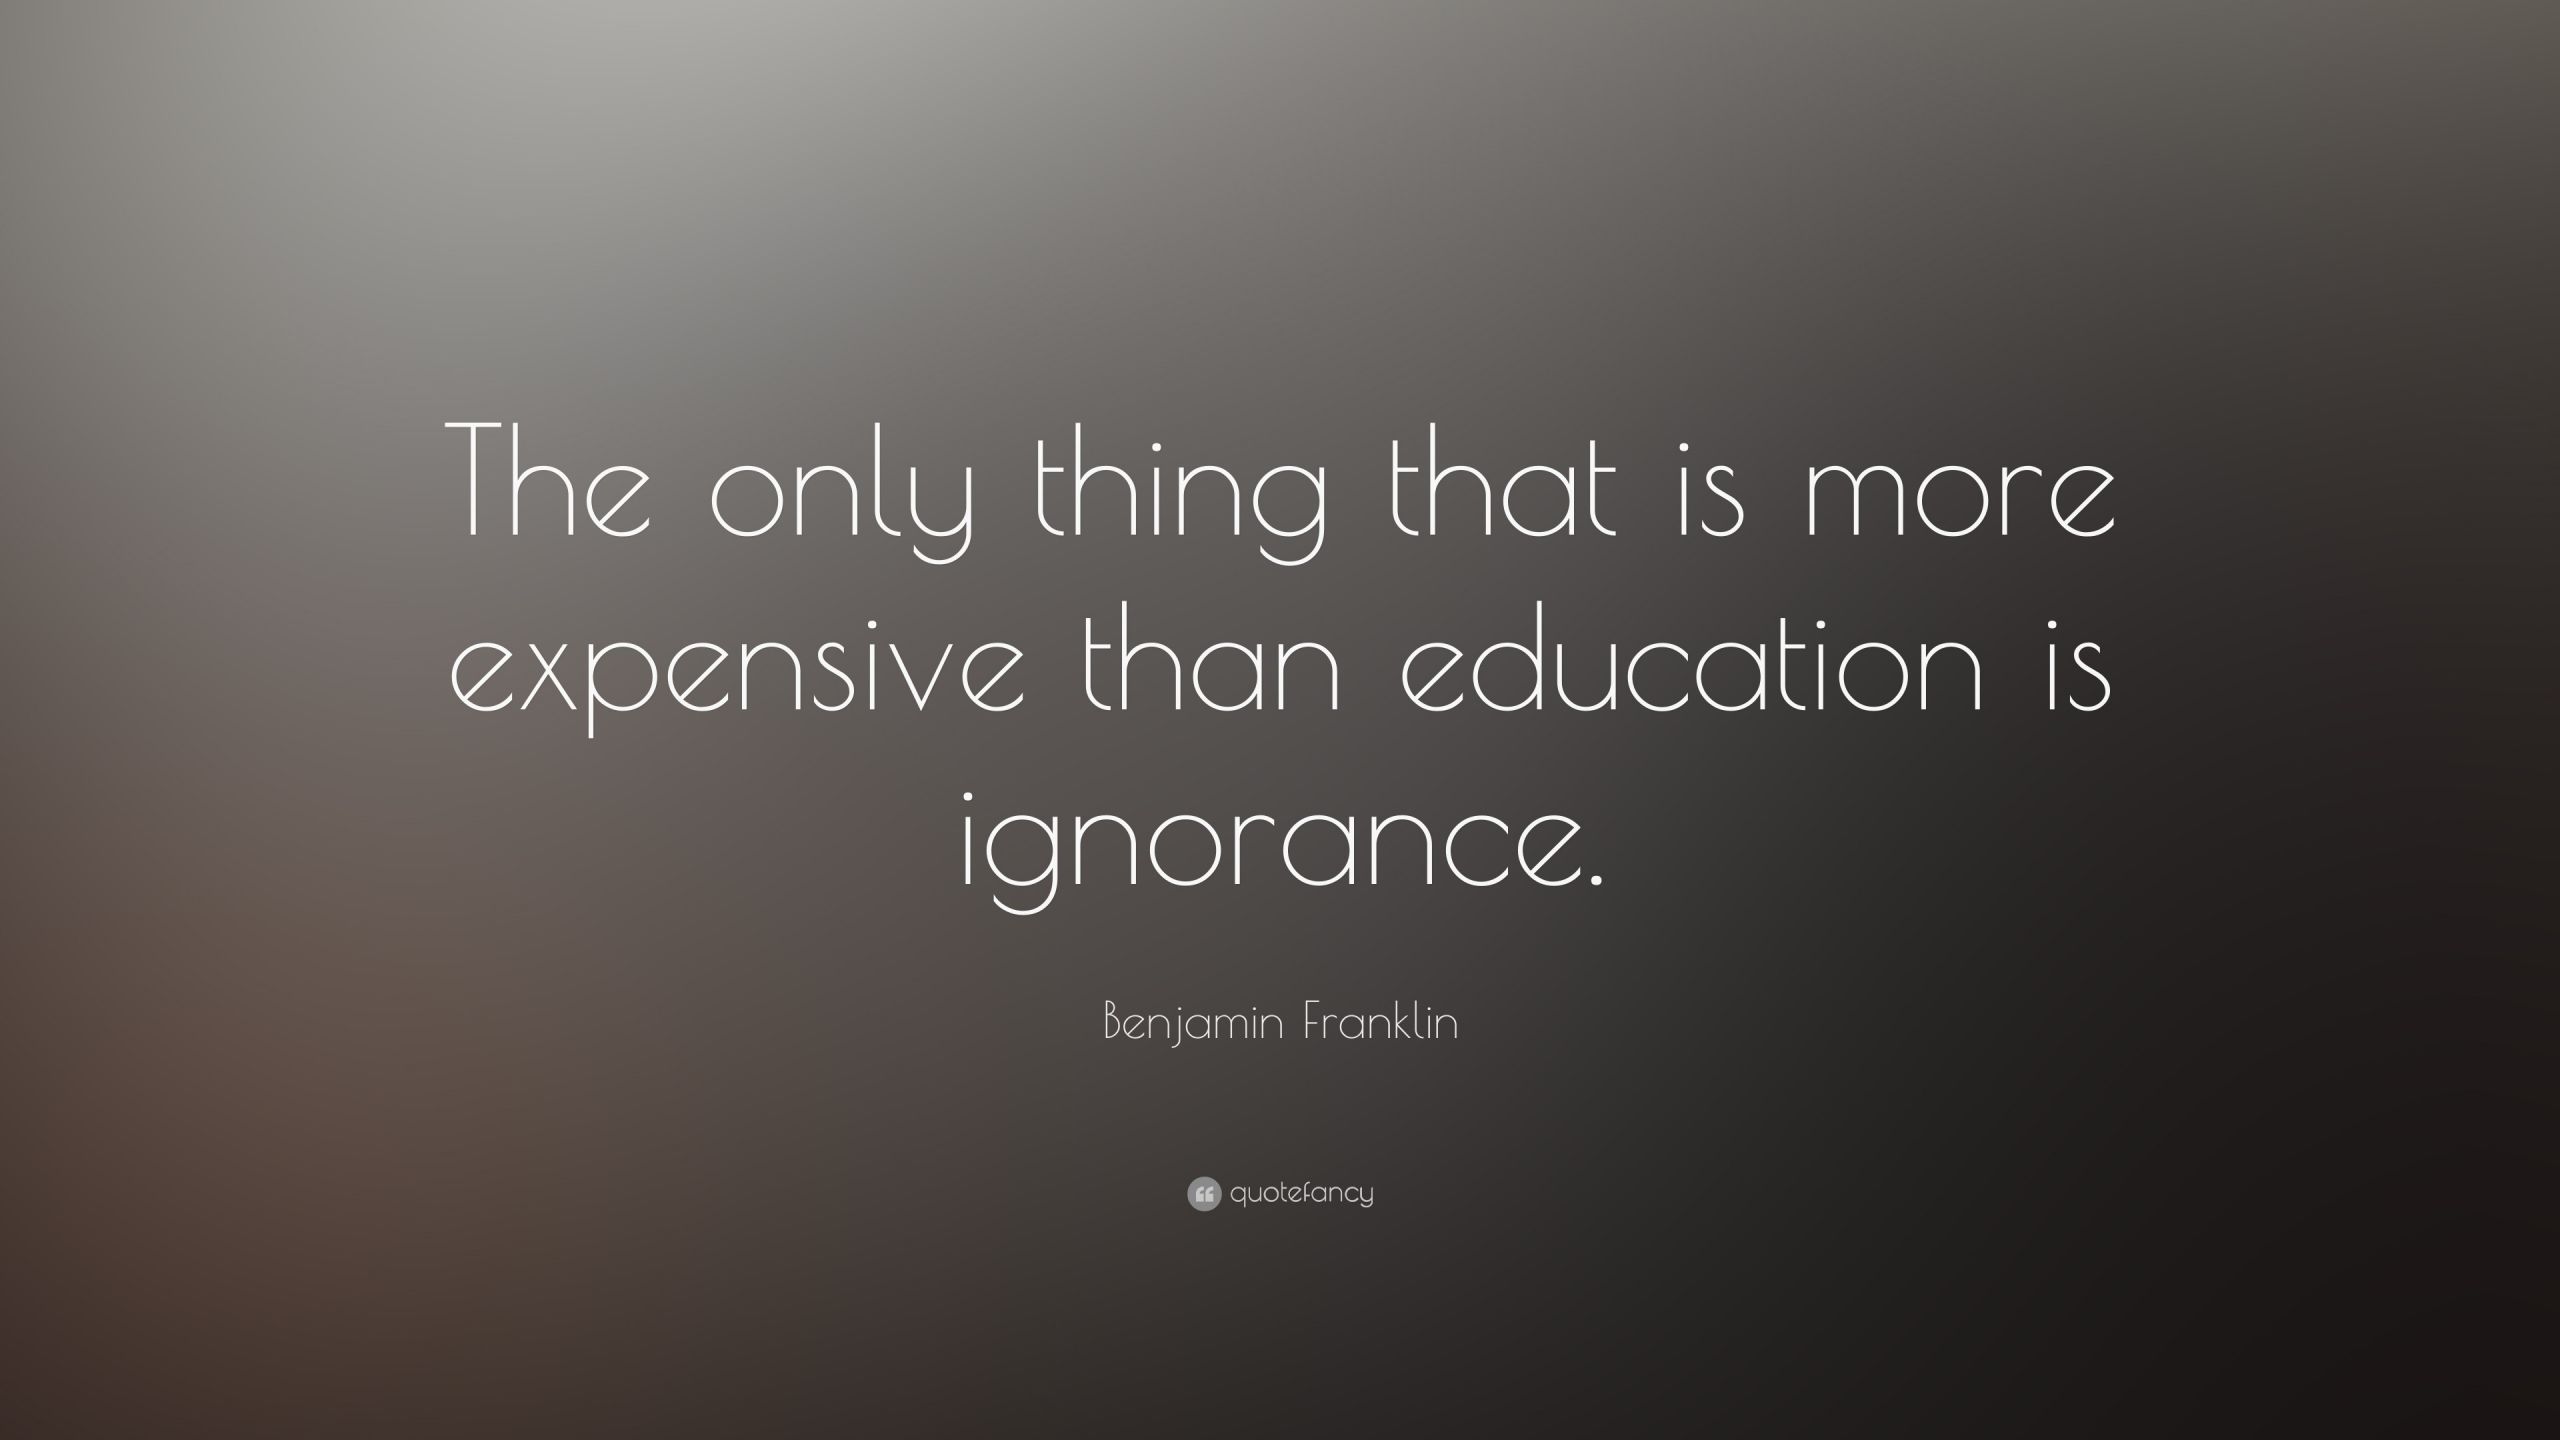 Benjamin Franklin Quotes On Education
 Benjamin Franklin Quote “The only thing that is more